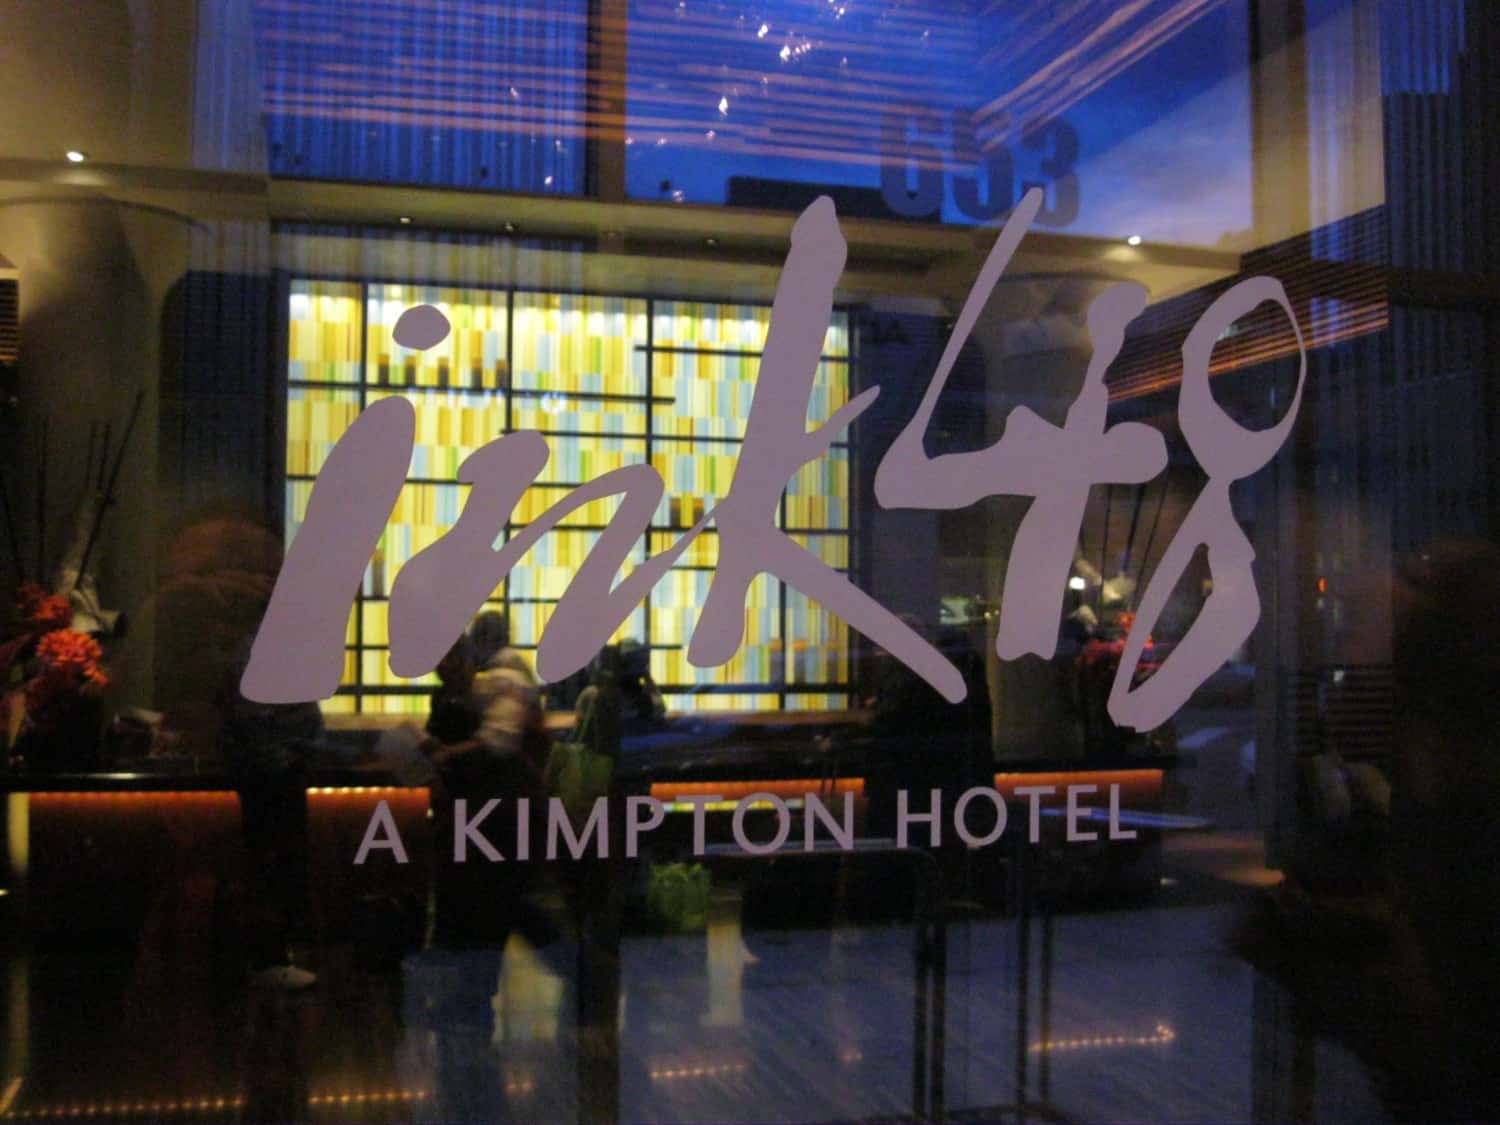 Ink 48 in New York - a Kimpton Hotel. One of the pet-friendly hotel chains where pets stay free!